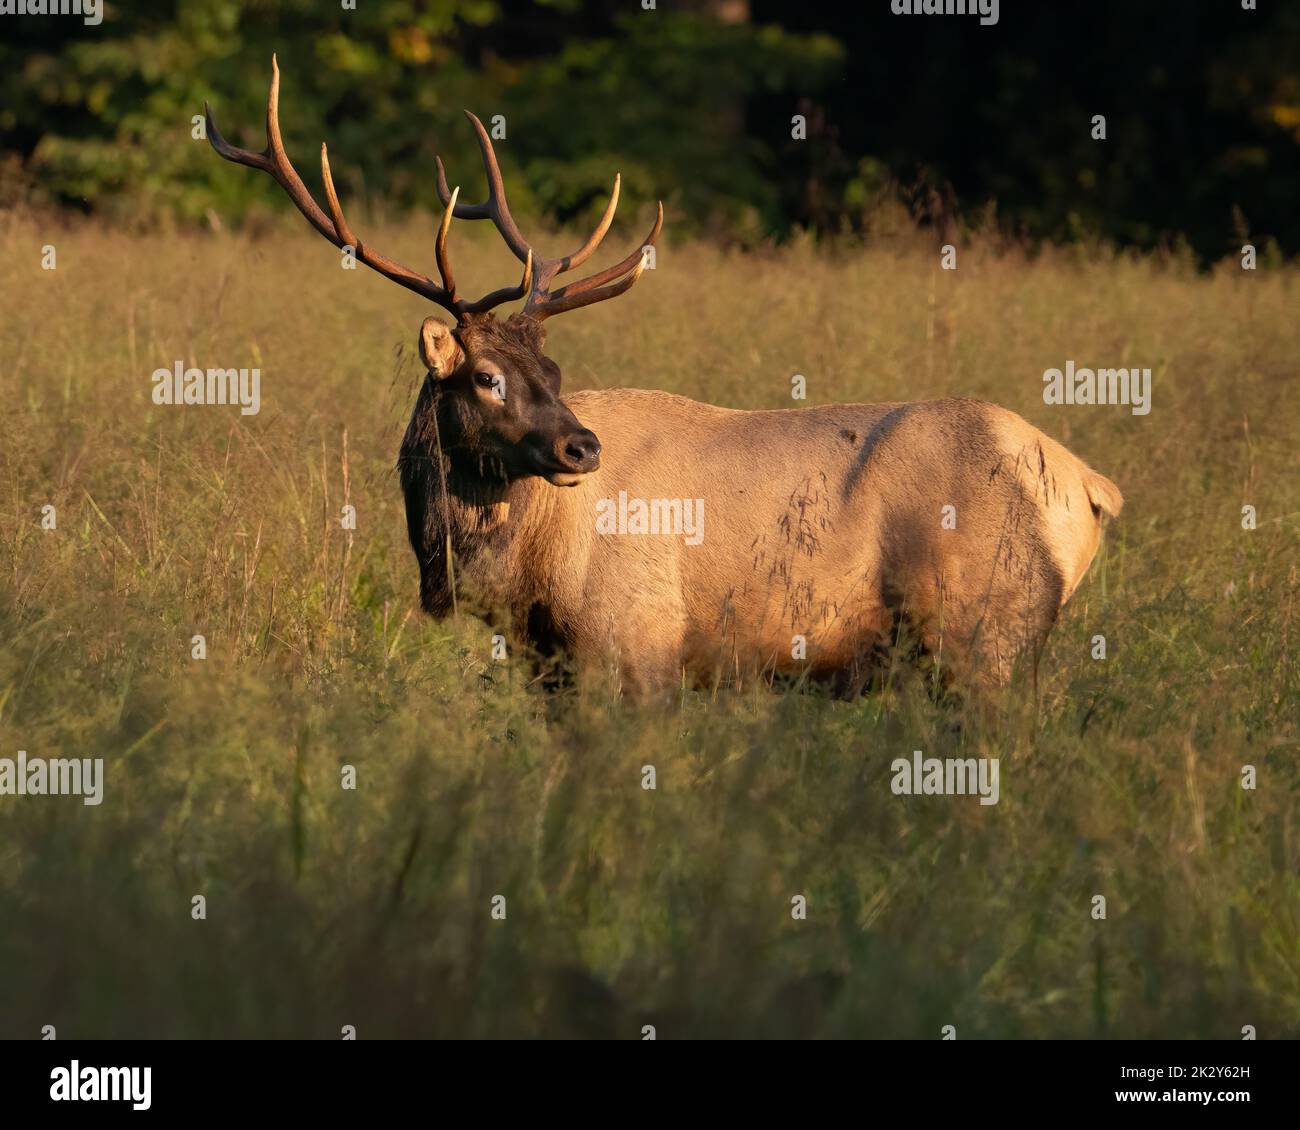 A young bull elk posing at sunset. Stock Photo